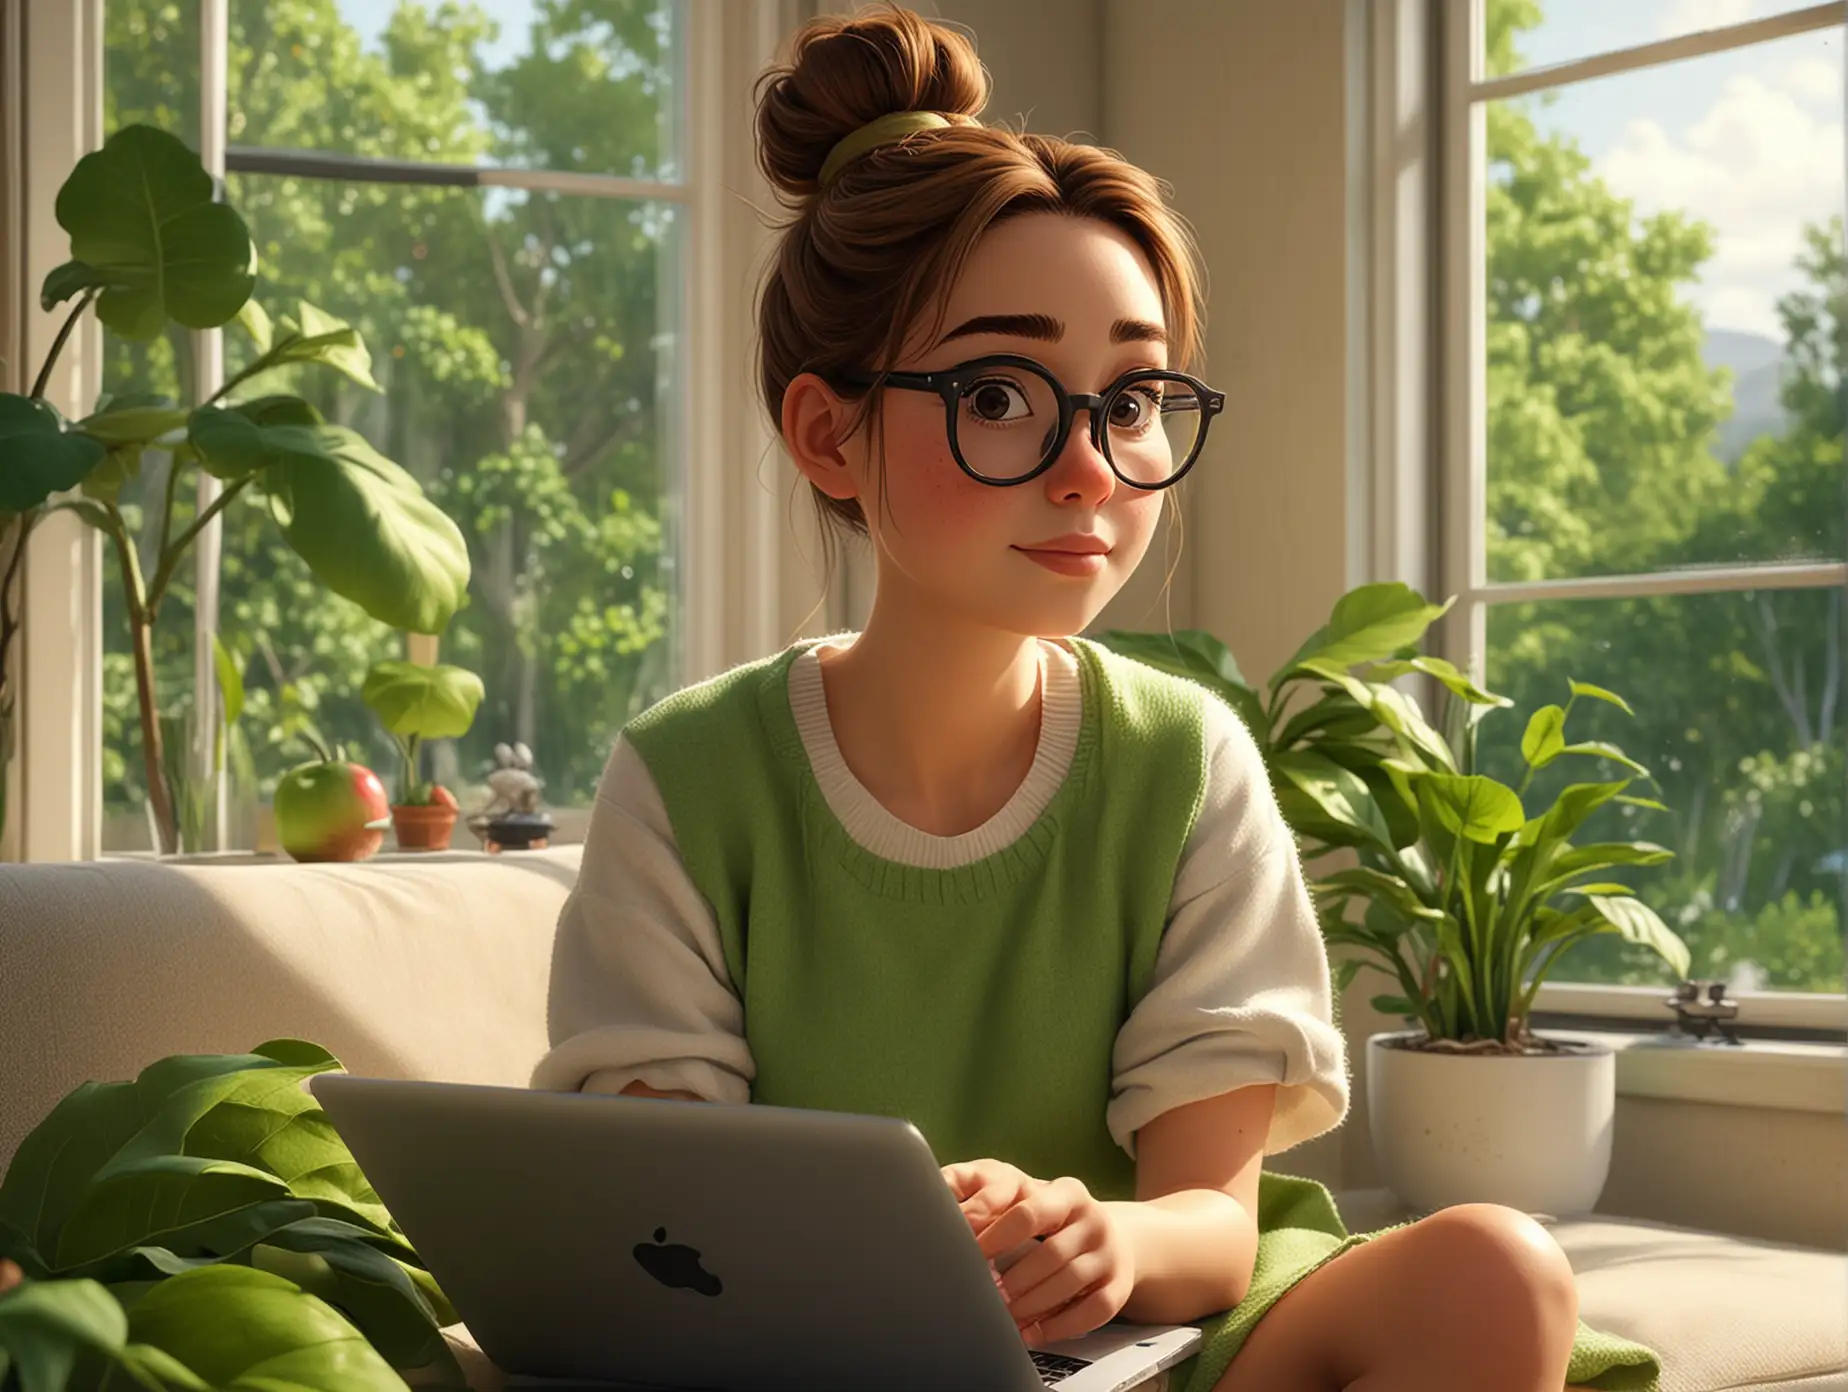 Pixar-Style-Woman-with-Bun-Hairstyle-Working-from-Home